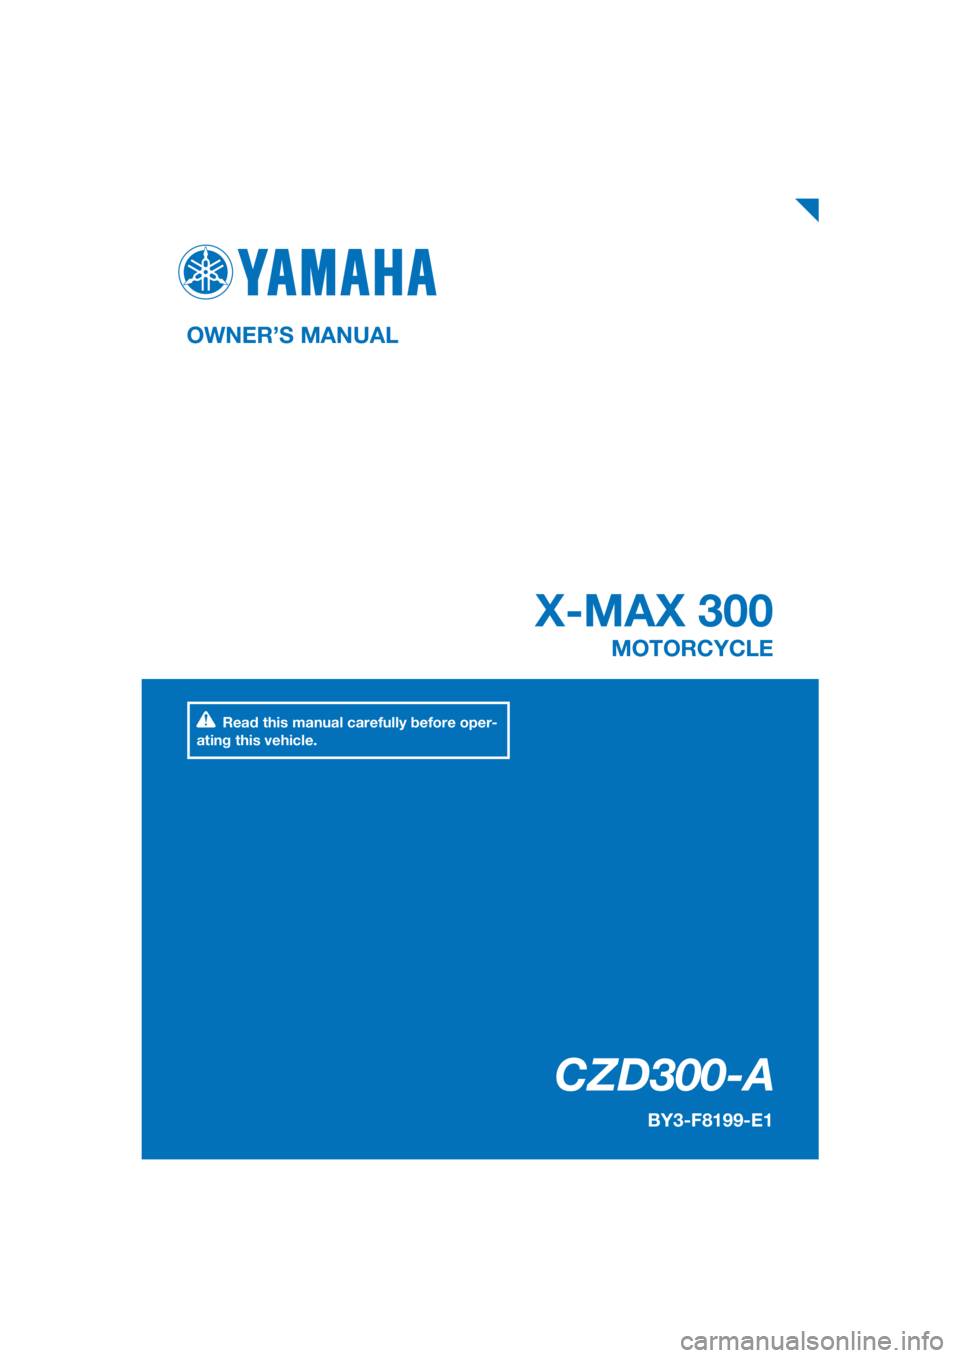 YAMAHA XMAX 300 2018  Owners Manual PANTONE285C
CZD300-A
X-MAX 300
OWNER’S MANUAL
BY3-F8199-E1
MOTORCYCLE
[English  (E)]
Read this manual carefully before oper-
ating this vehicle. 